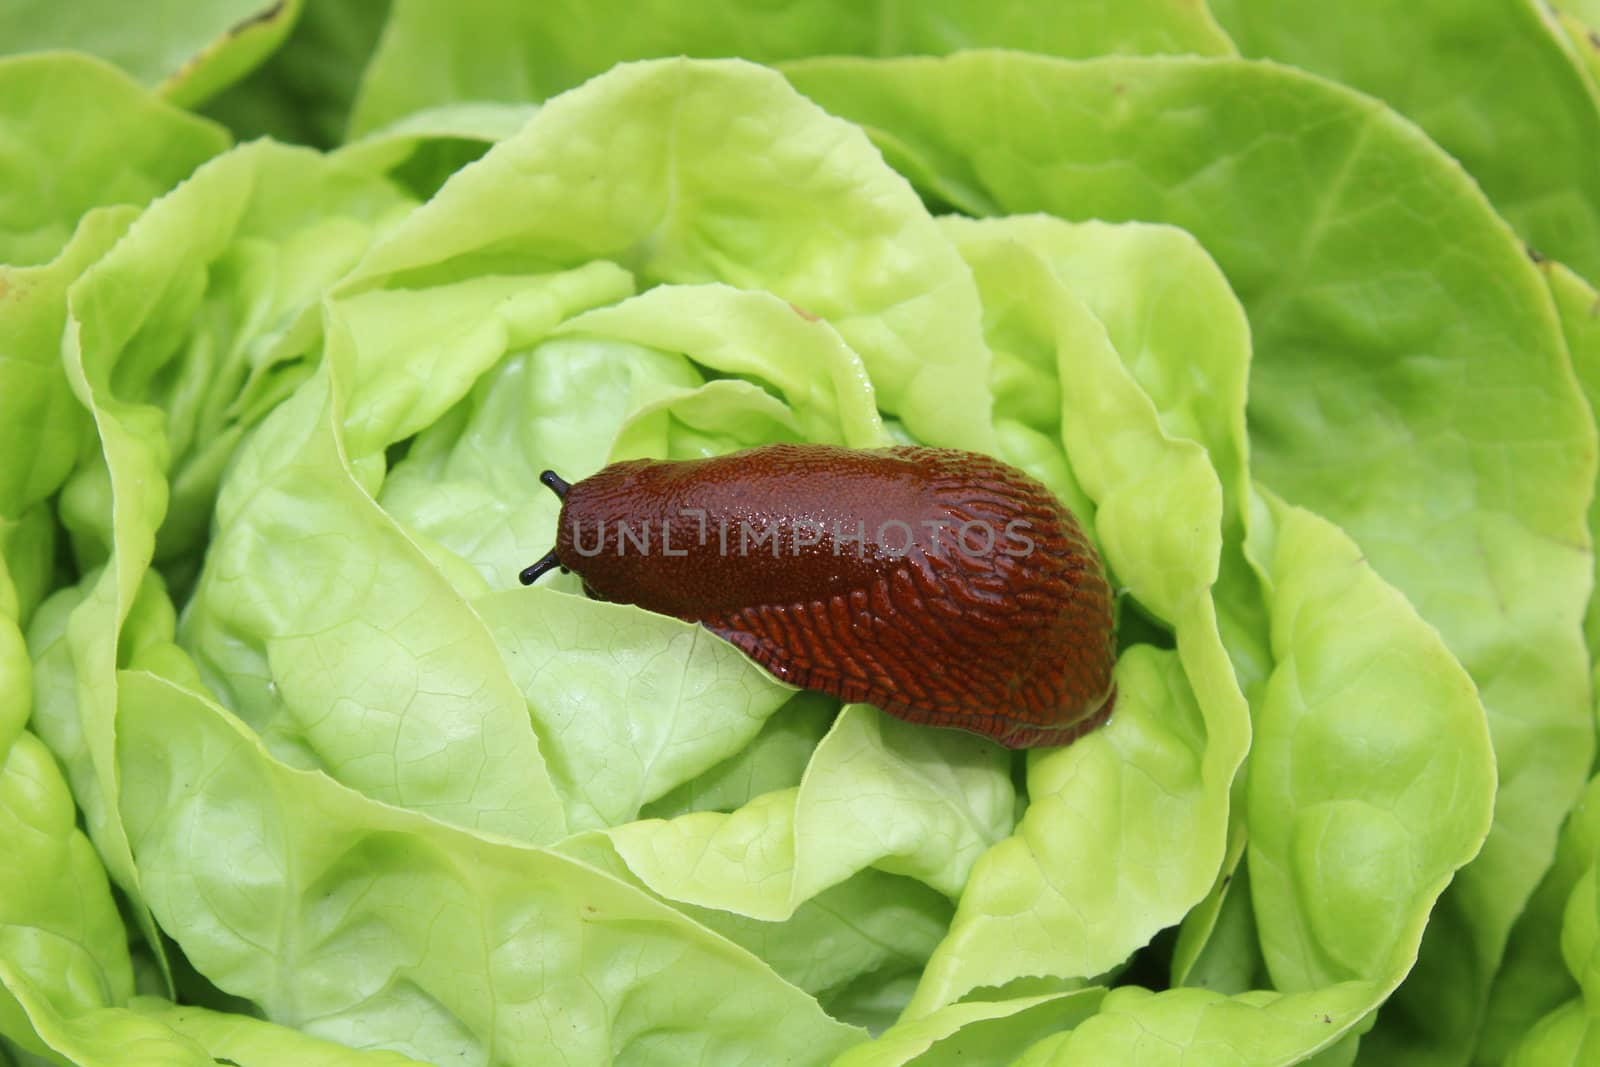 The picture shows a red snail on a salad leaf